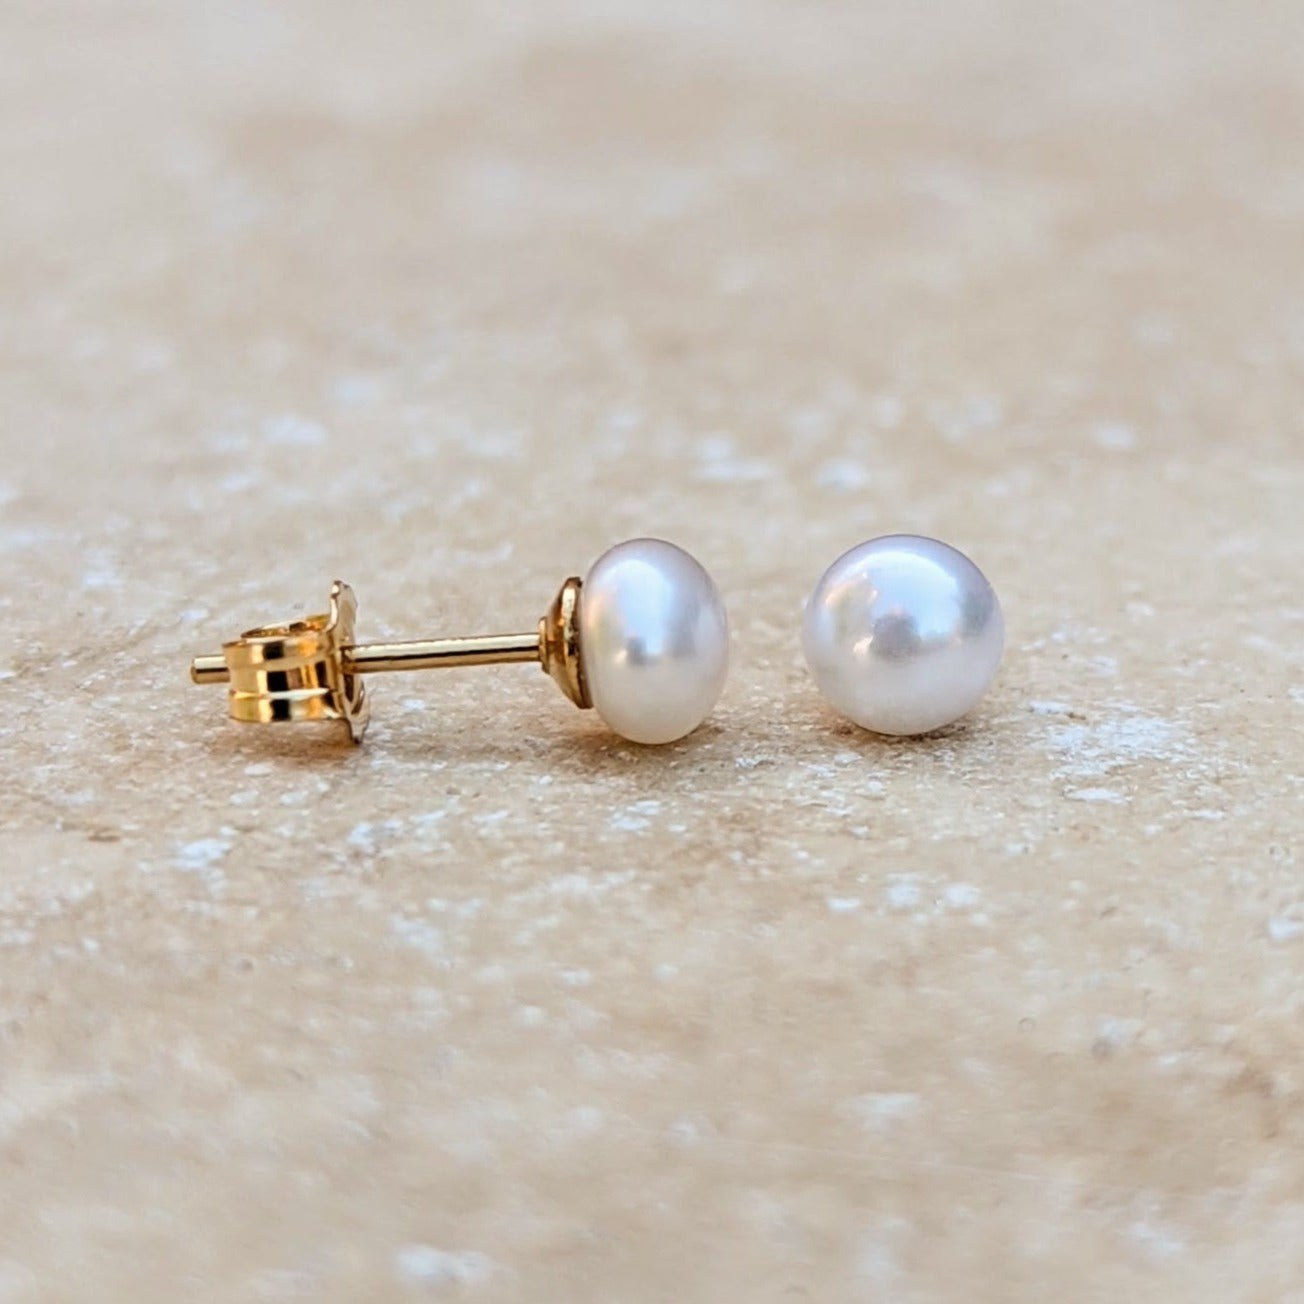 A pair of small button pearl stud earrings in gold filled